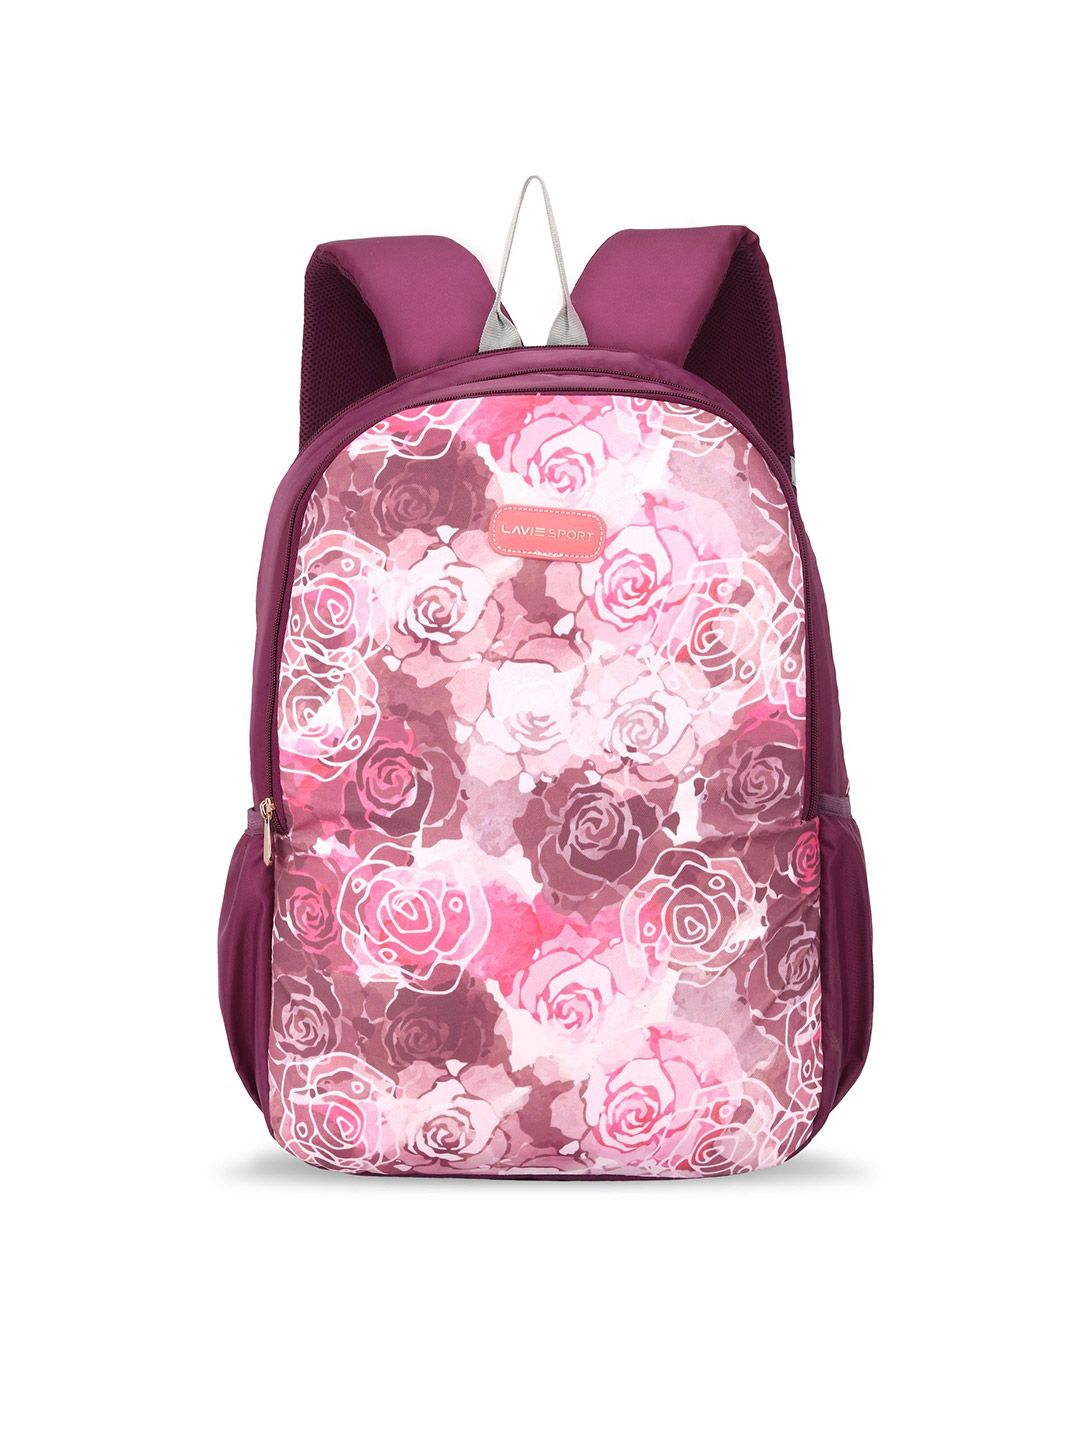 LAVIE SPORT Women Purple & Pink Graphic Backpack Price in India